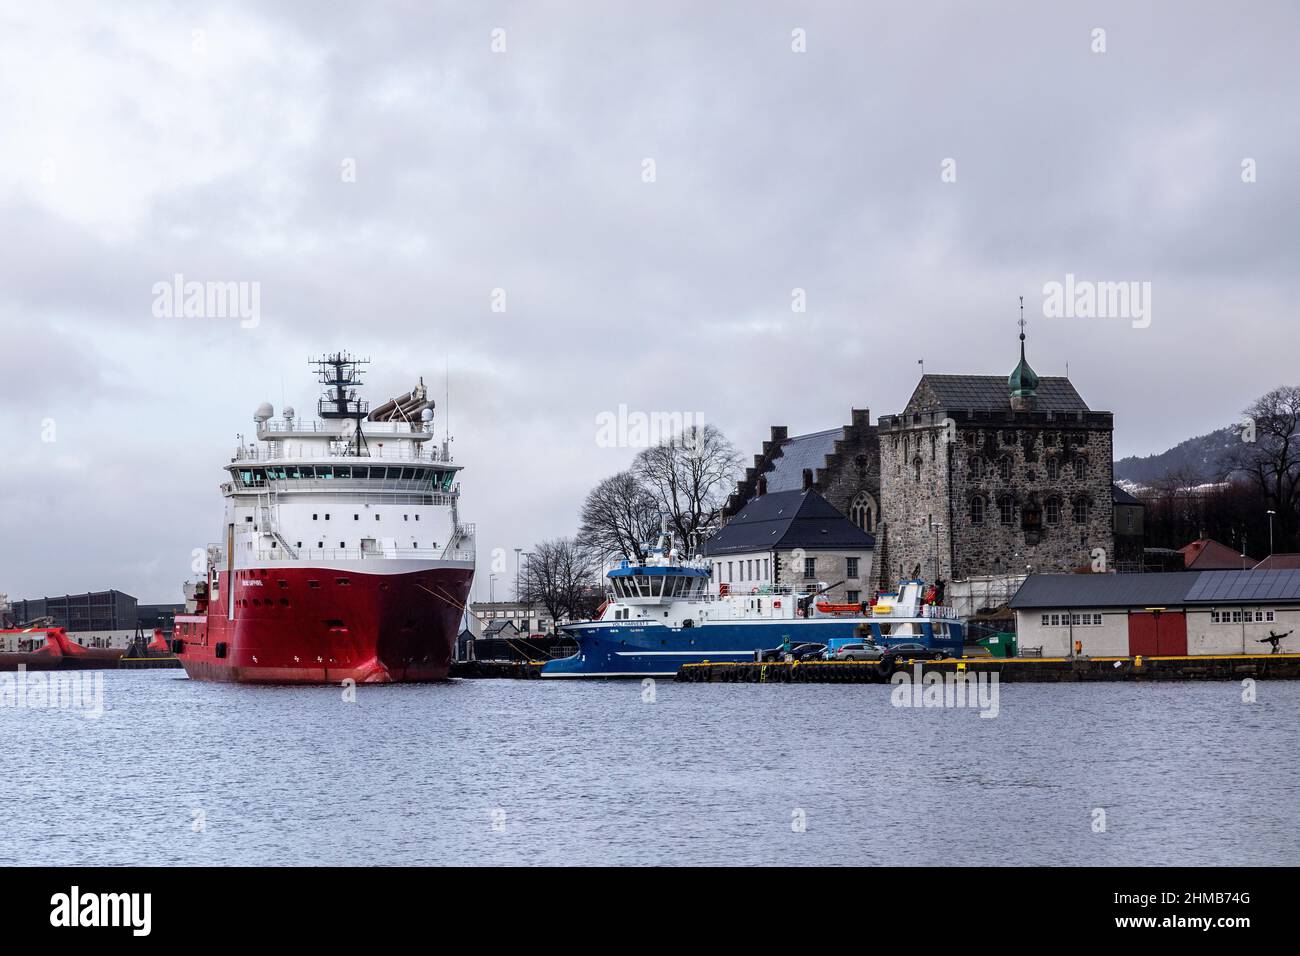 Offshore AHTS anchor handling tug supply vessel Normand Sapphire at Festningskaien quay, in port of Bergen, Norway. Fish factory ship Volt Harvest II Stock Photo